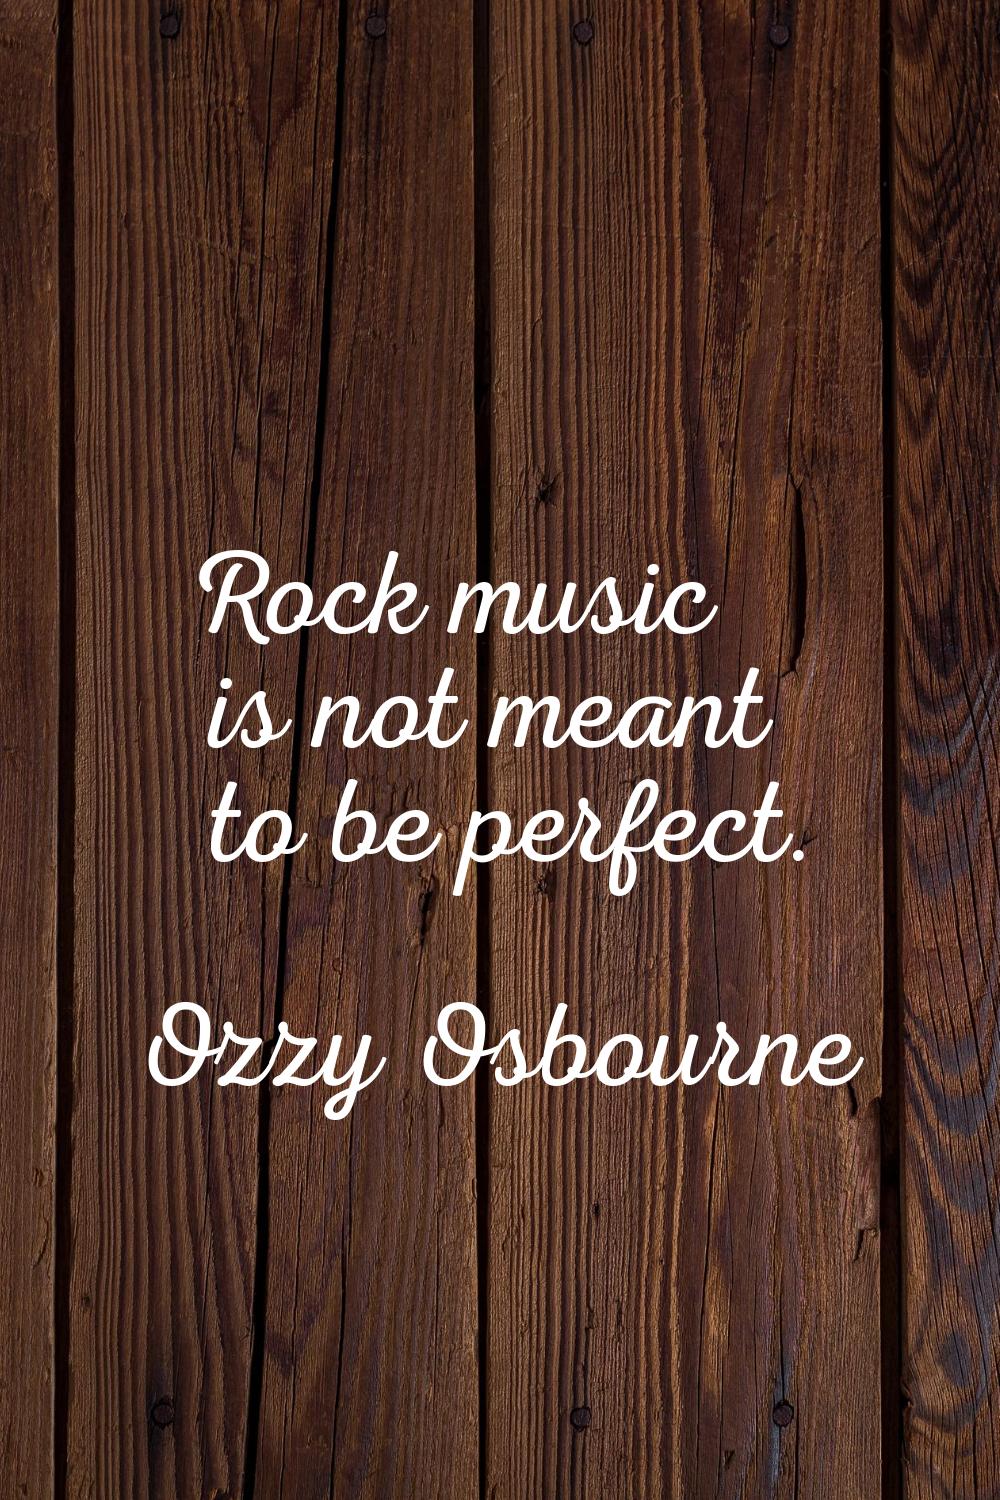 Rock music is not meant to be perfect.